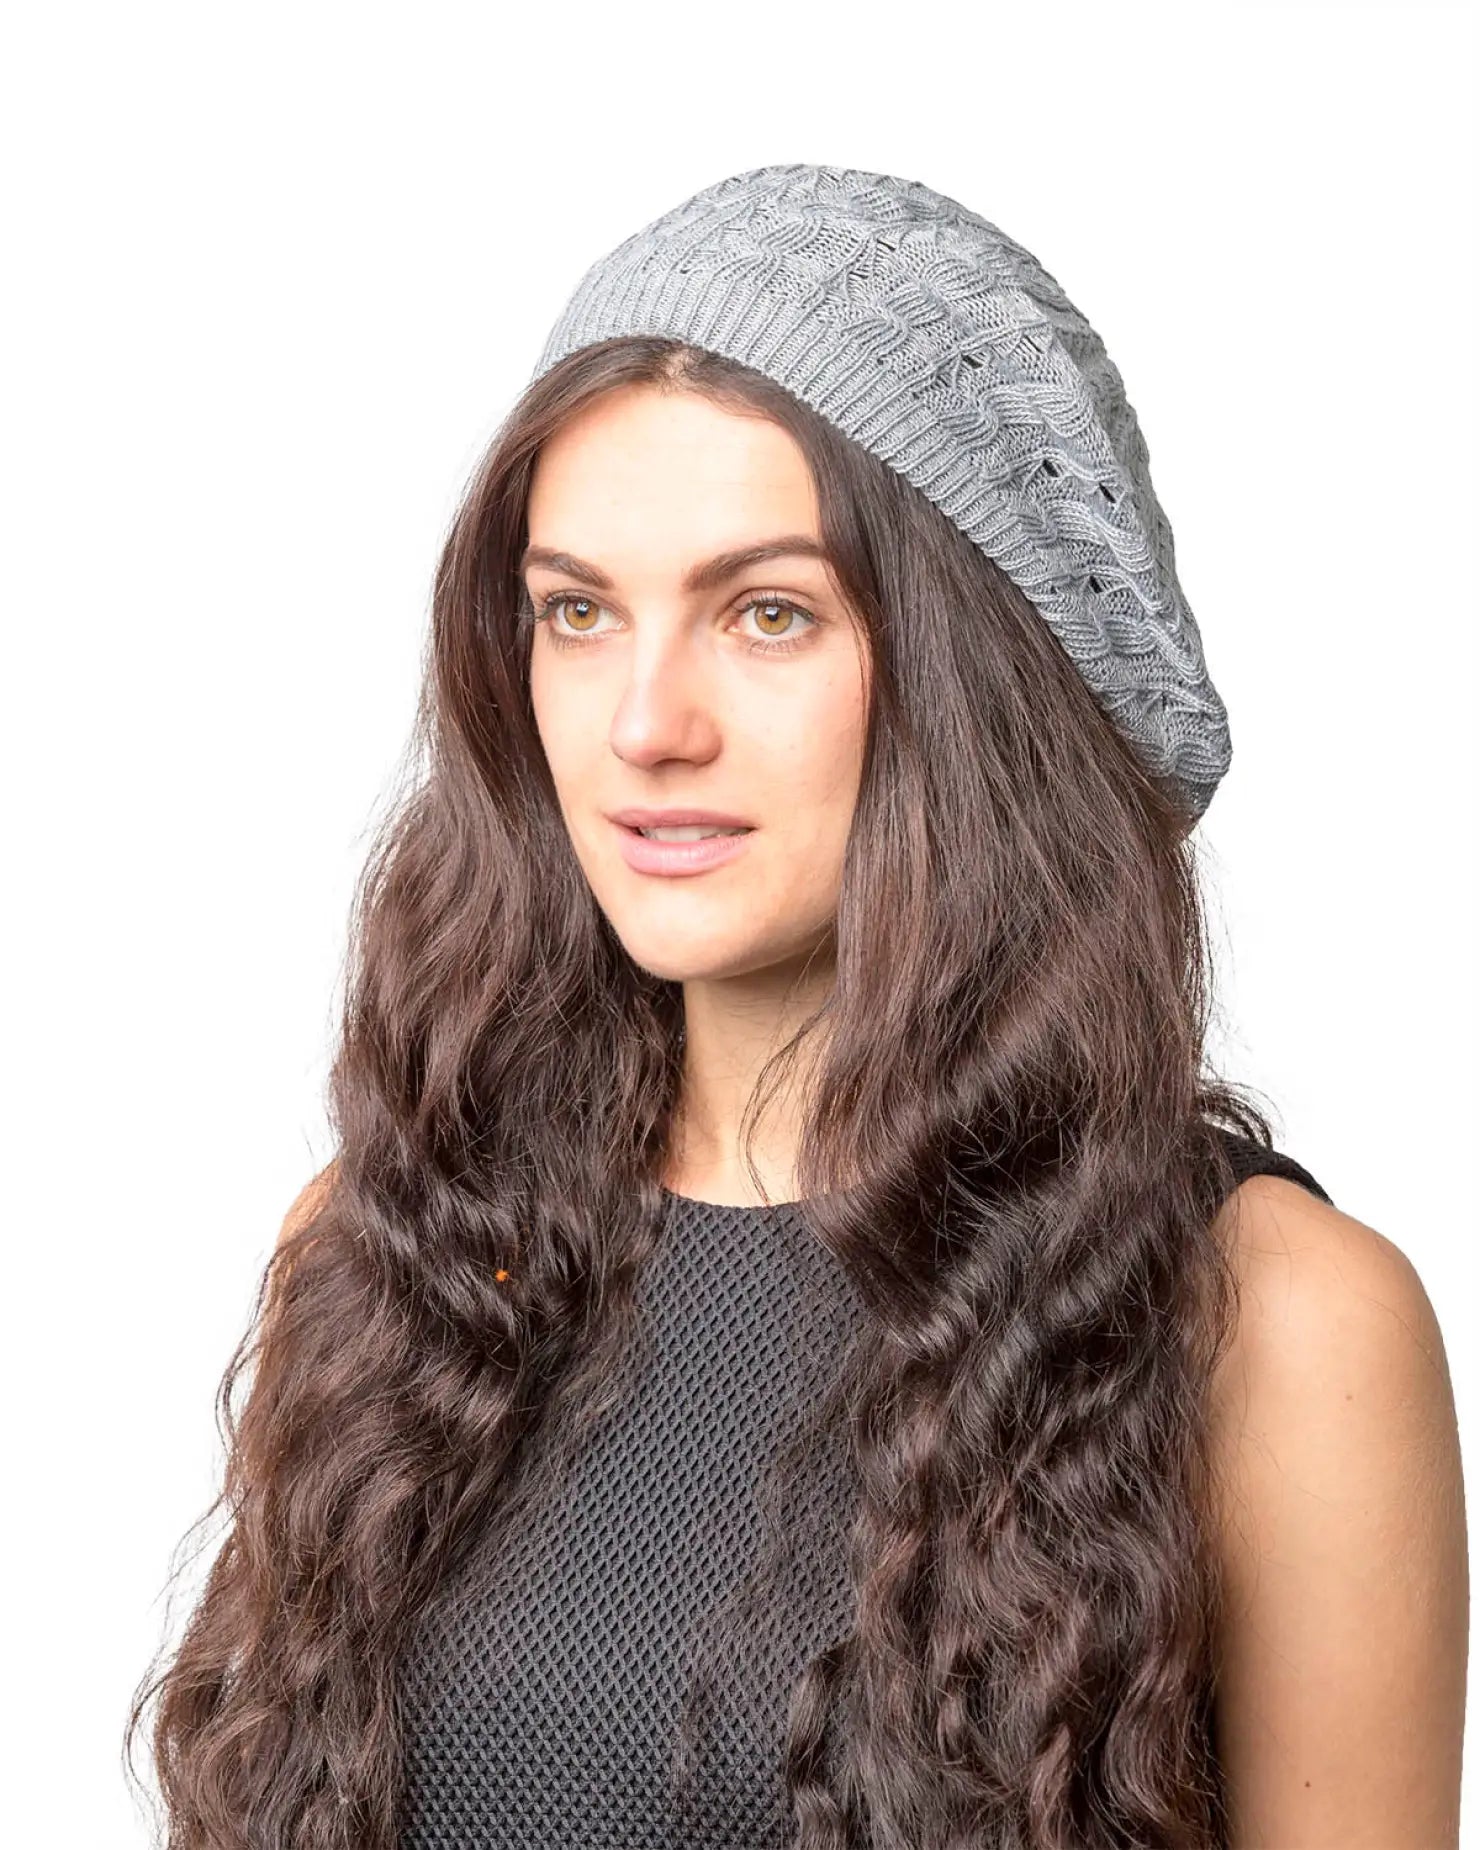 Woman with long brown hair wearing gray hat - Women’s Cable Design Knitted Crochet Beanie Hat